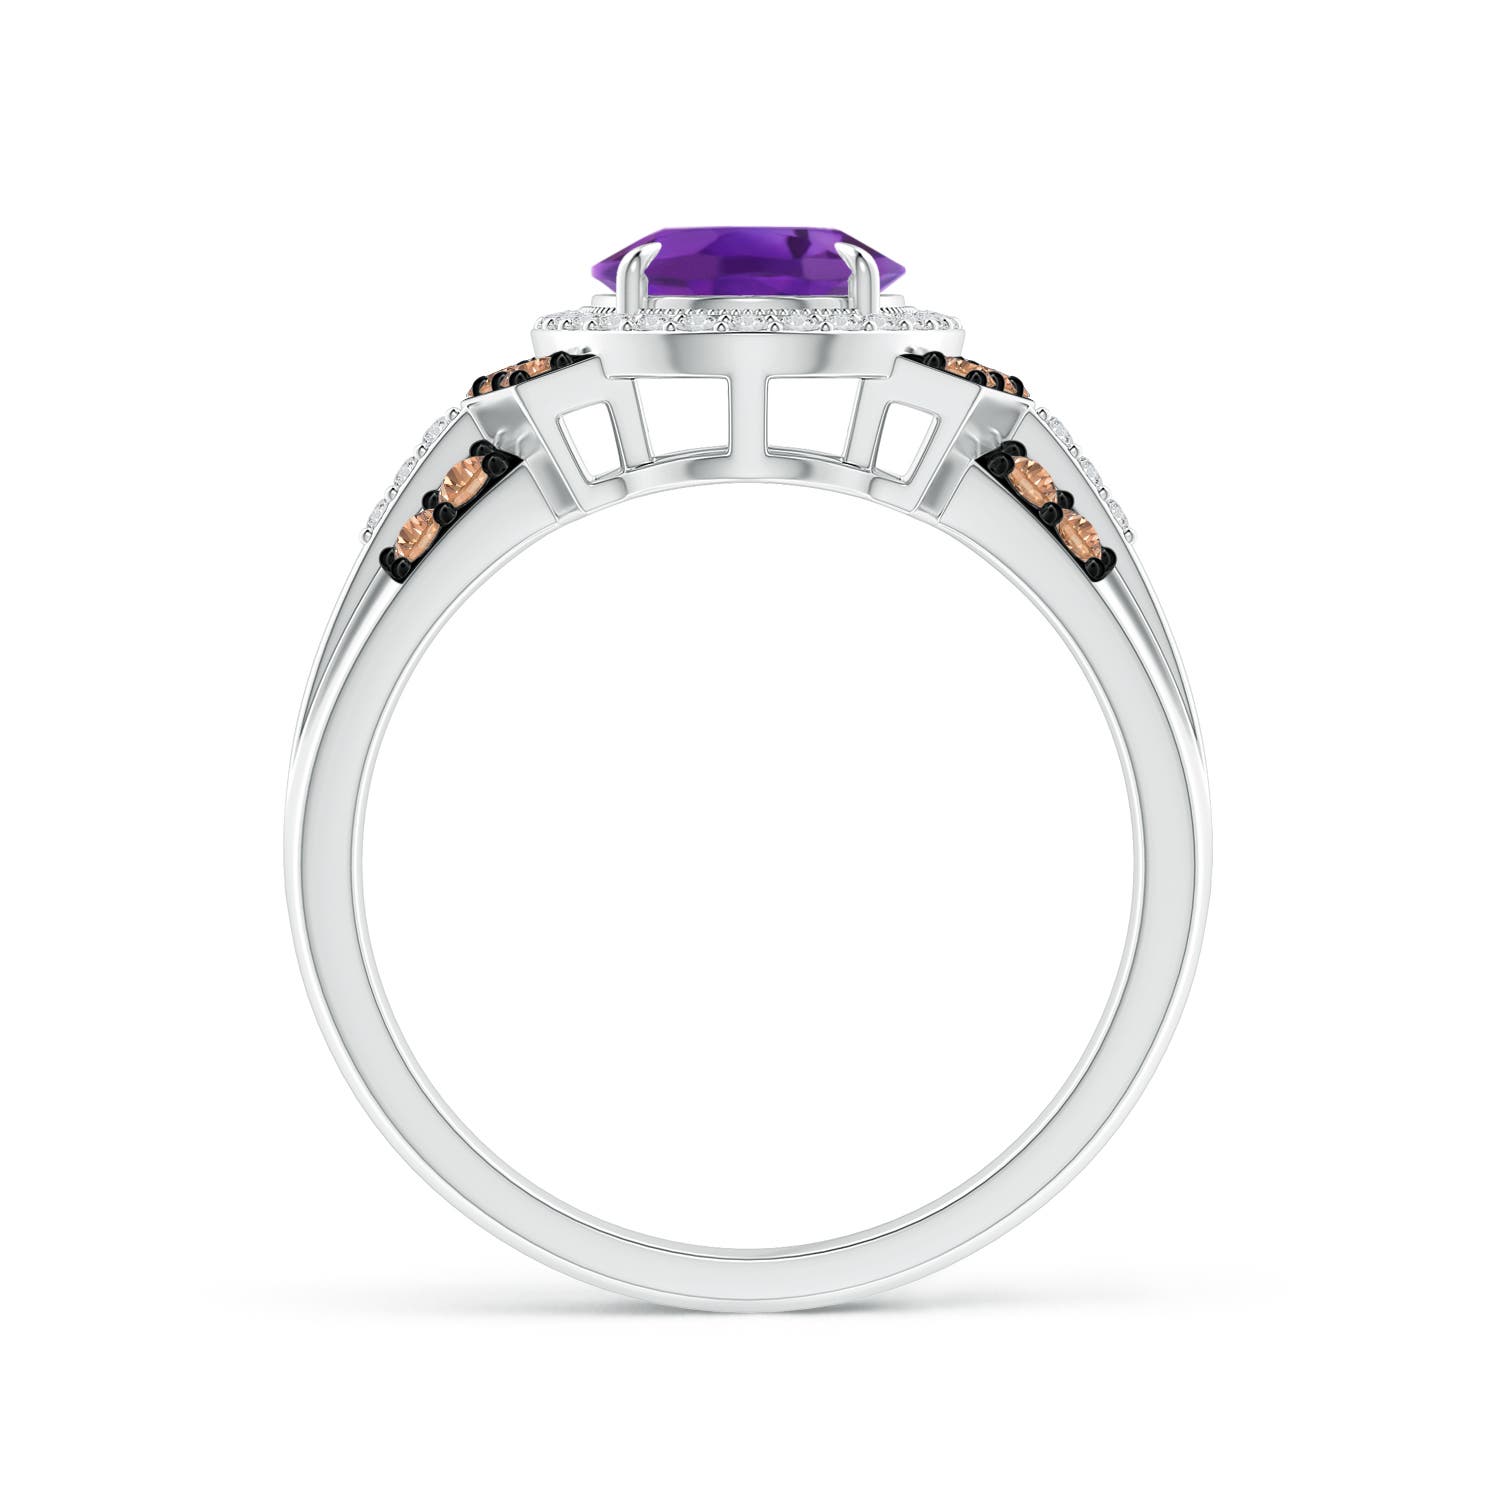 AAA - Amethyst / 2.02 CT / 14 KT White Gold